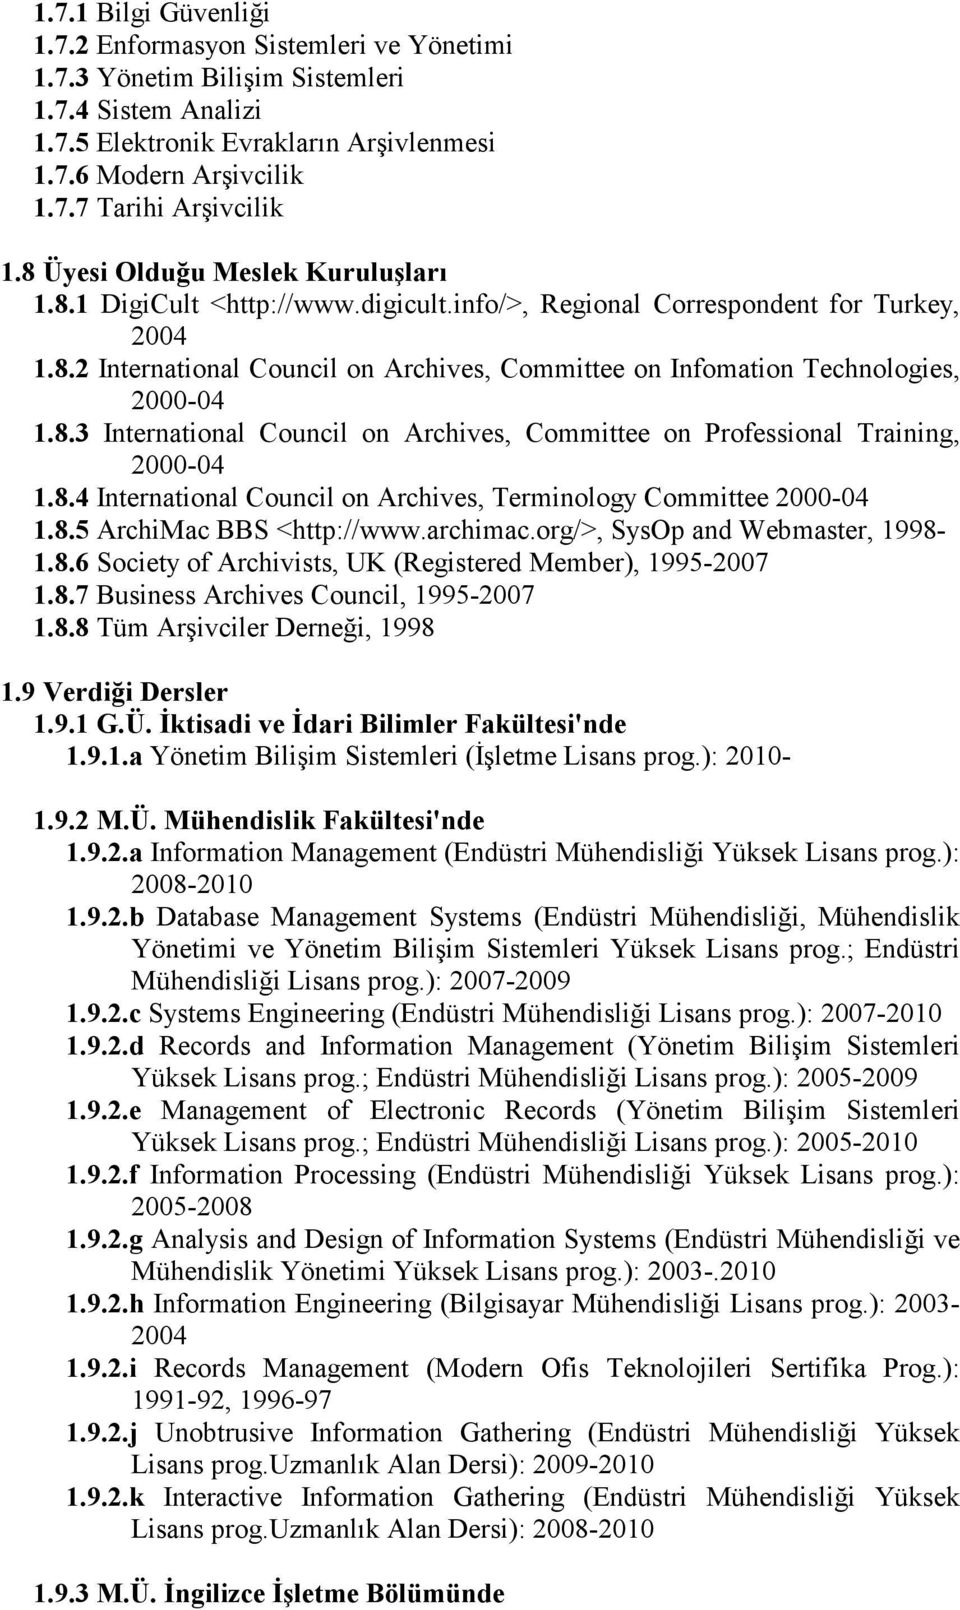 8.3 International Council on Archives, Committee on Professional Training, 2000-04 1.8.4 International Council on Archives, Terminology Committee 2000-04 1.8.5 ArchiMac BBS <http://www.archimac.